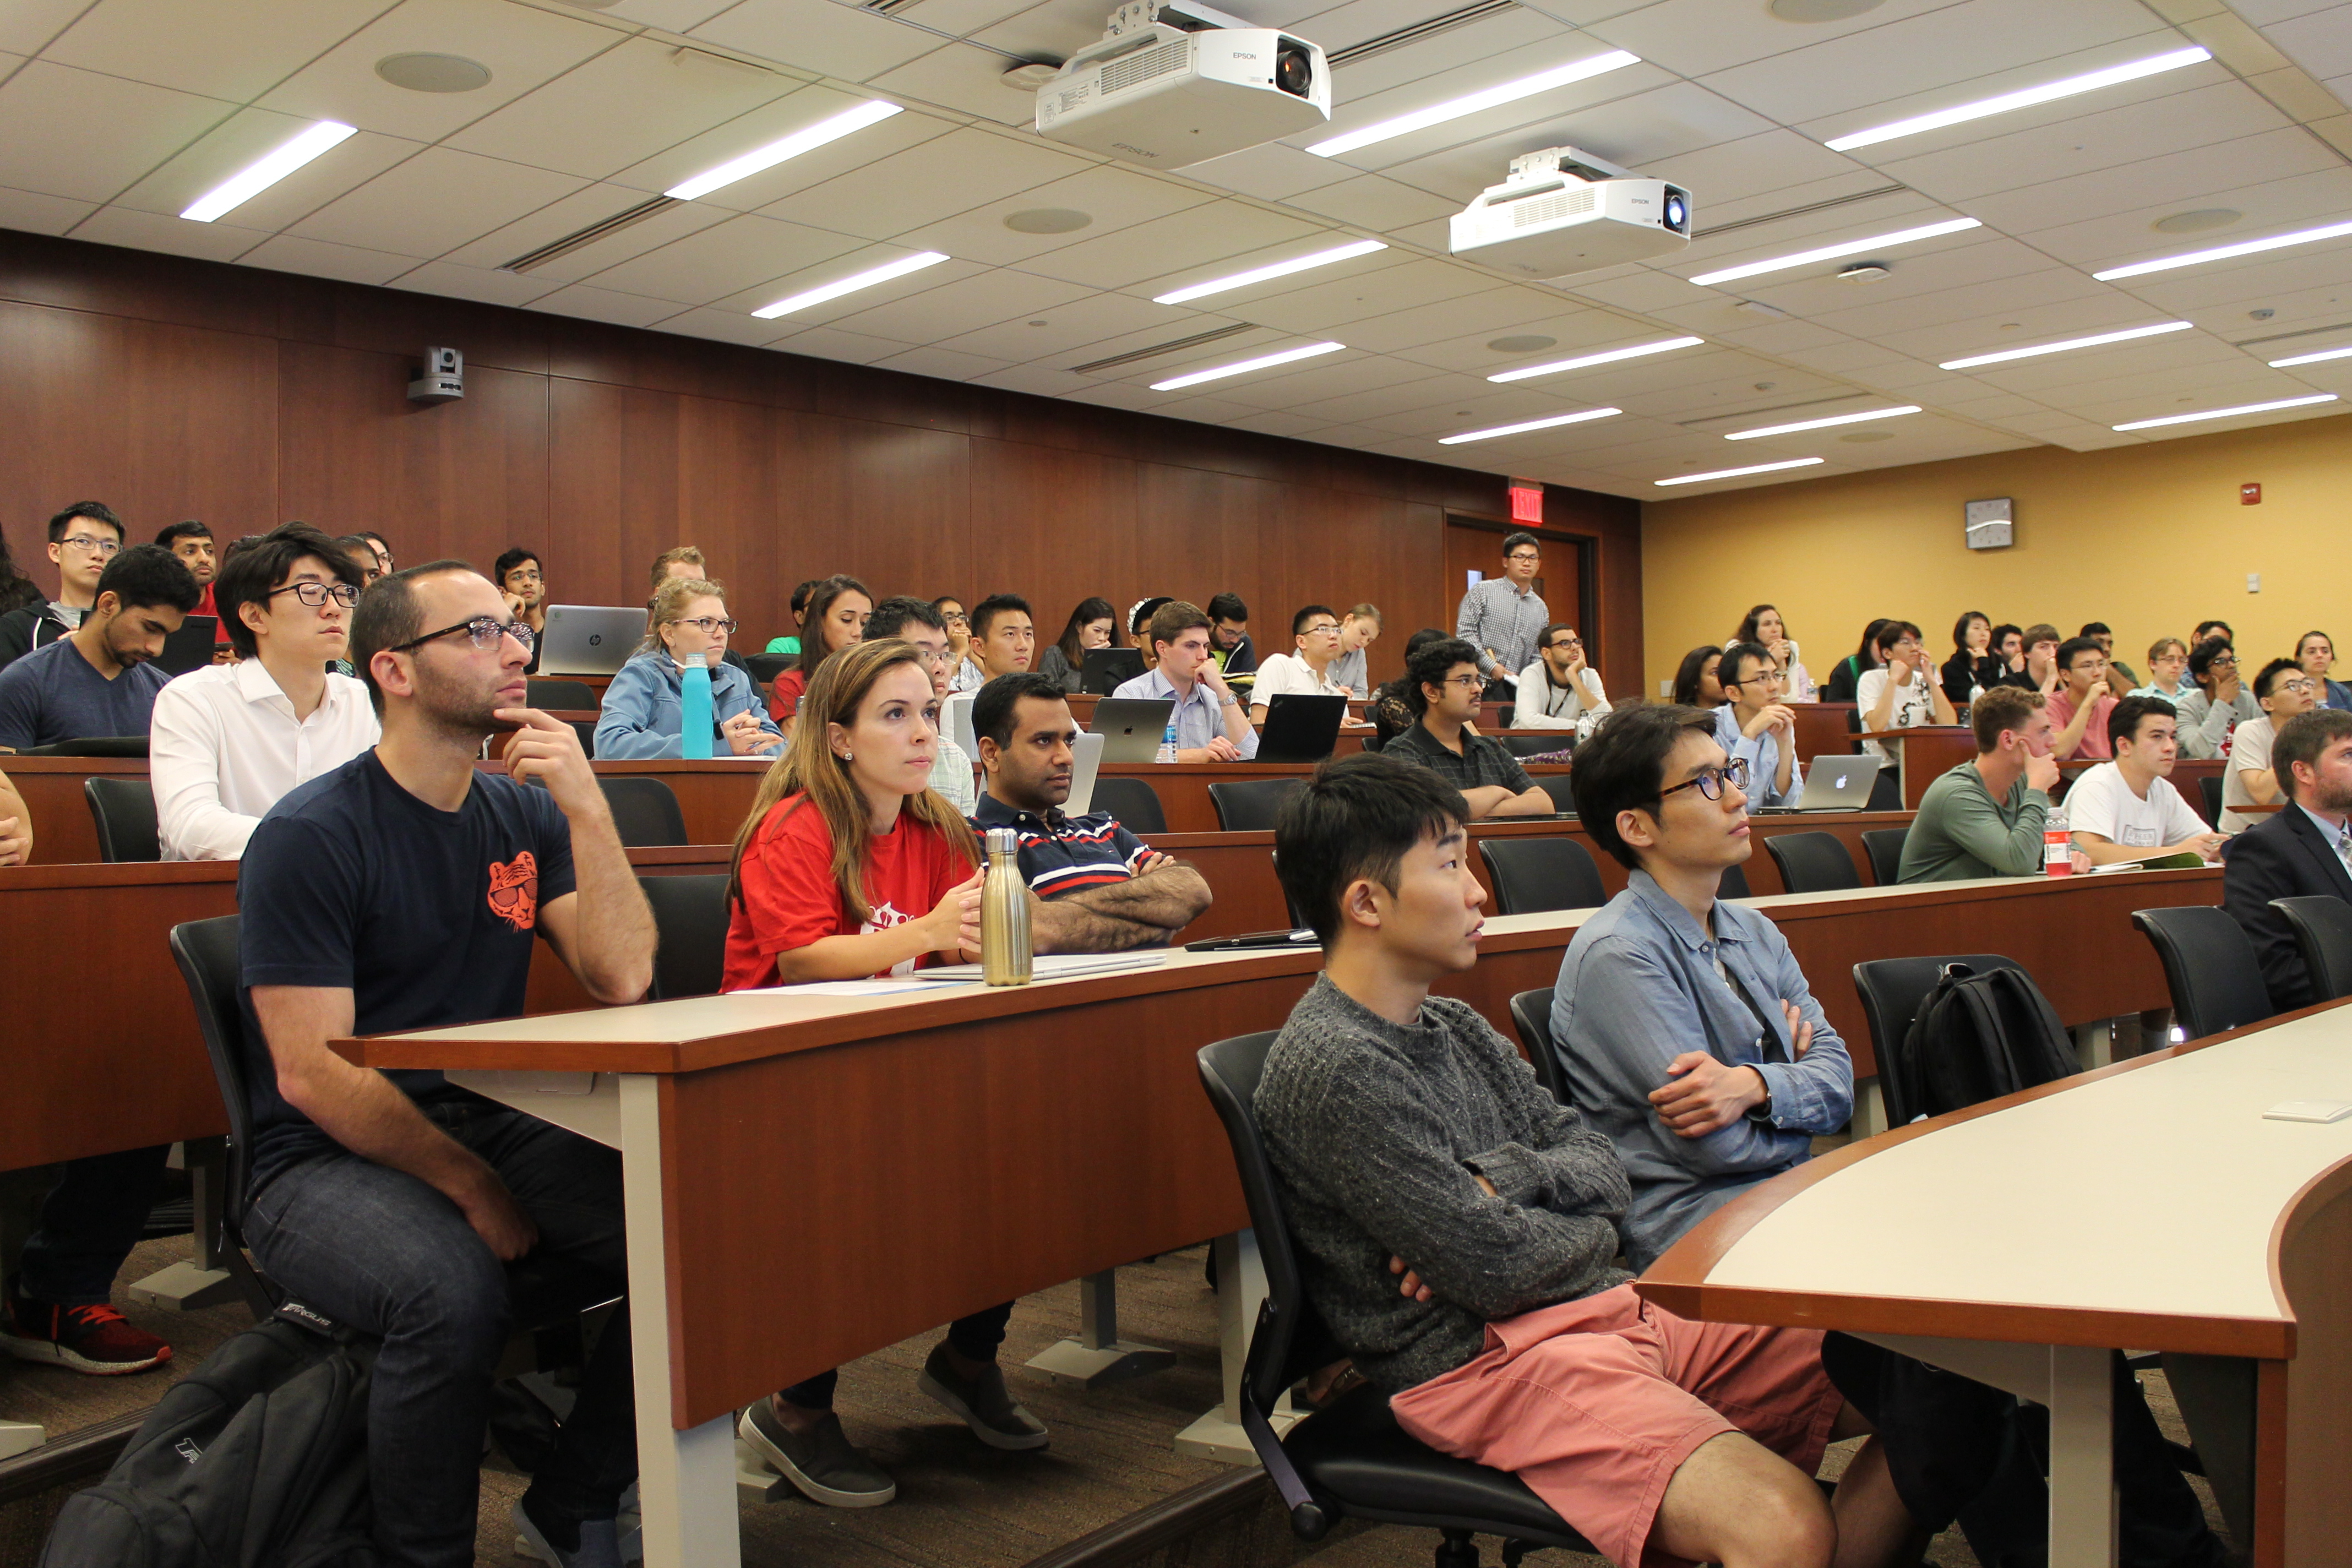 Several rows of students in a lecture room.